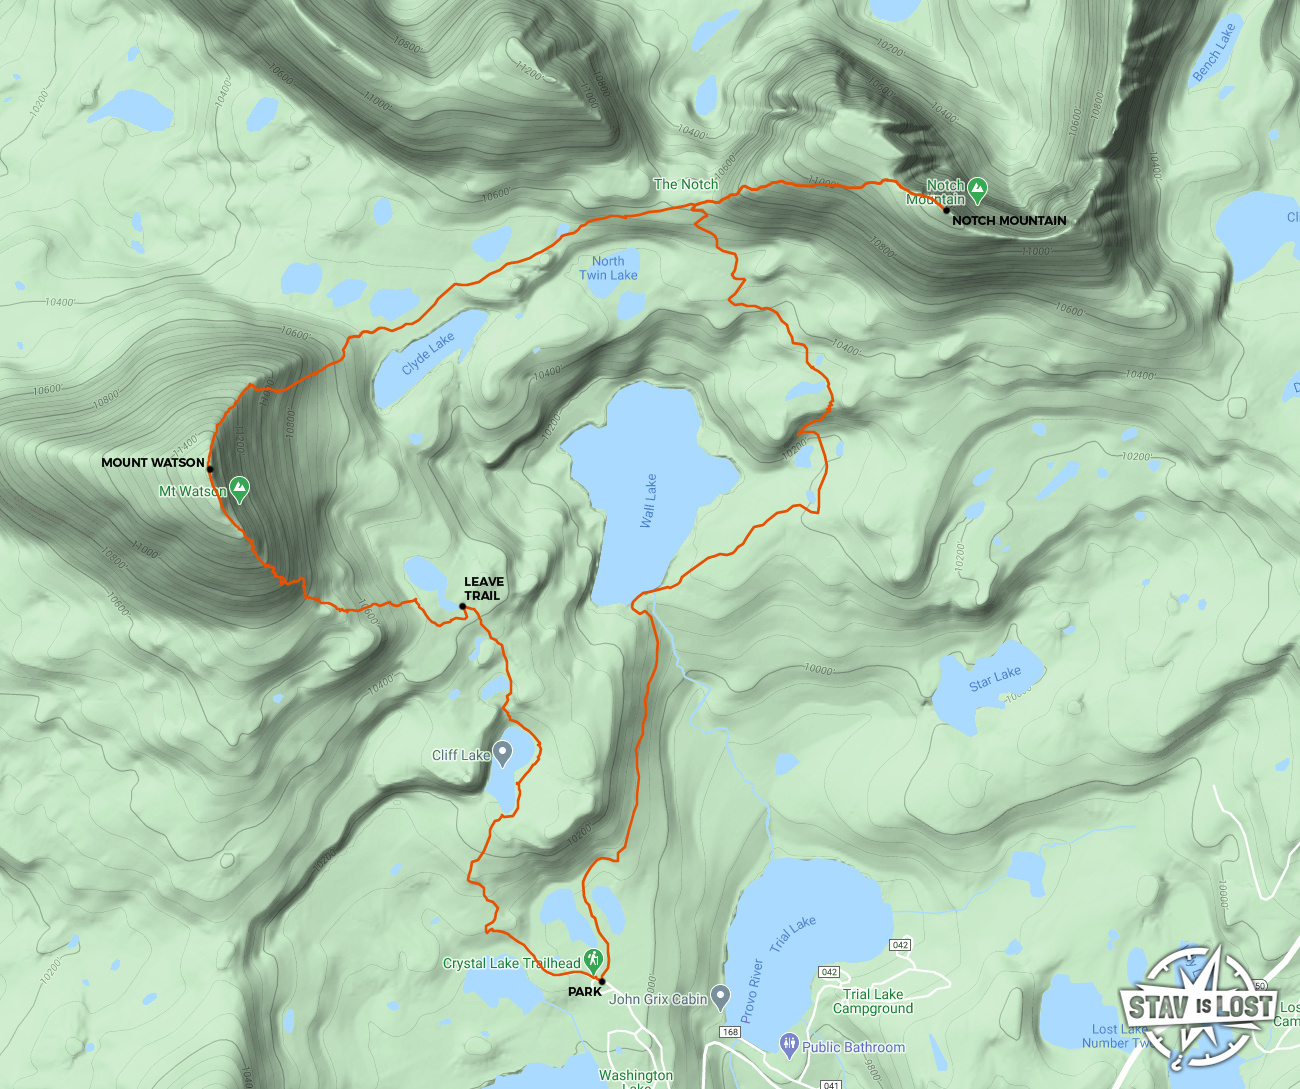 map for Mount Watson and Notch Mountain via Three Divide Lakes Loop by stav is lost